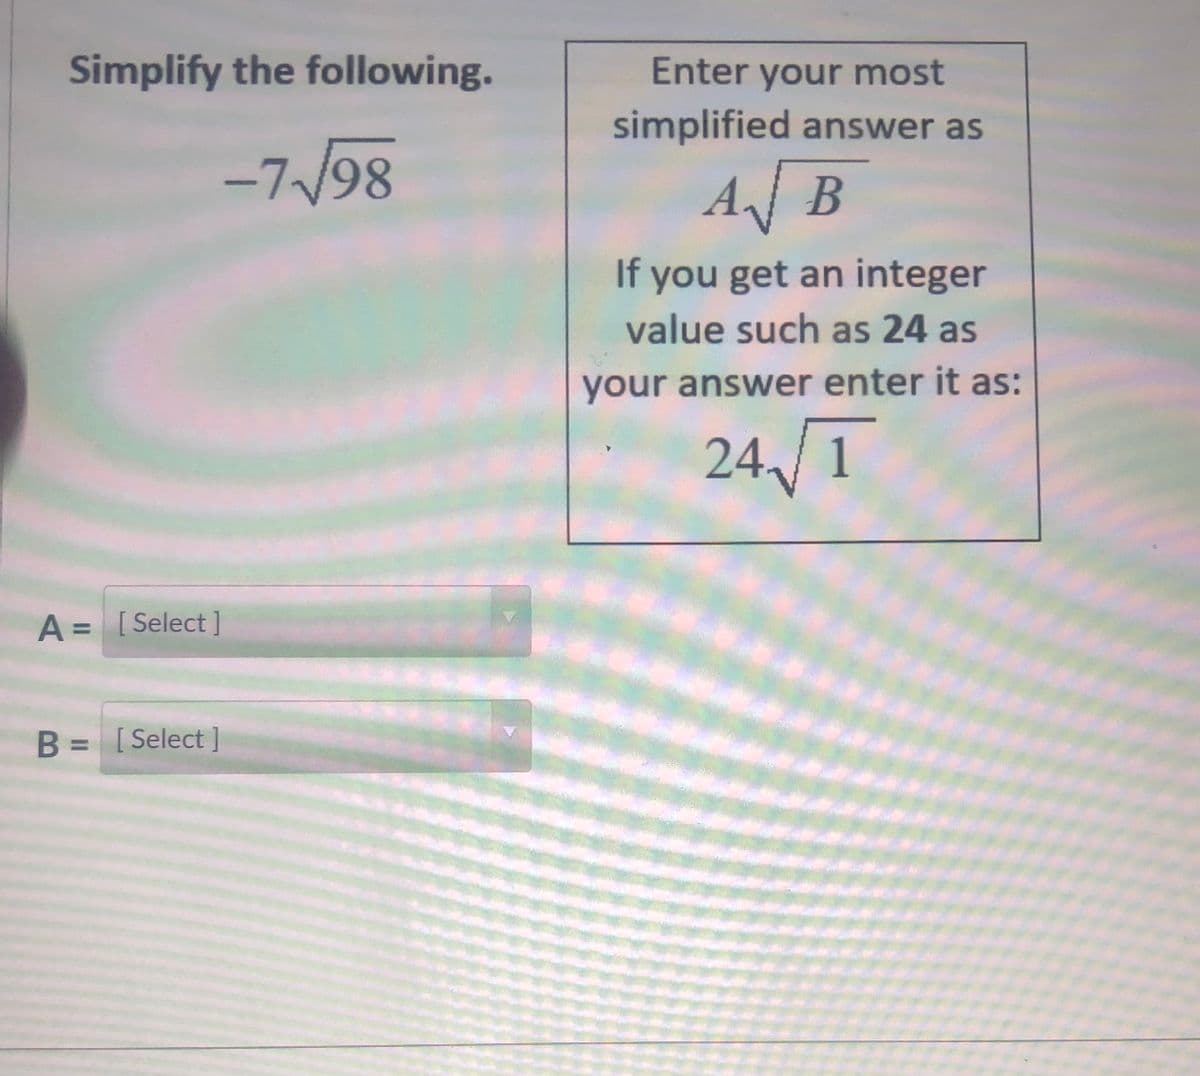 Simplify the following.
Enter your most
simplified answer as
-7/98
AJB
If you get an integer
value such as 24 as
your answer enter it as:
24,/1
A = [Select ]
B = [Select ]
